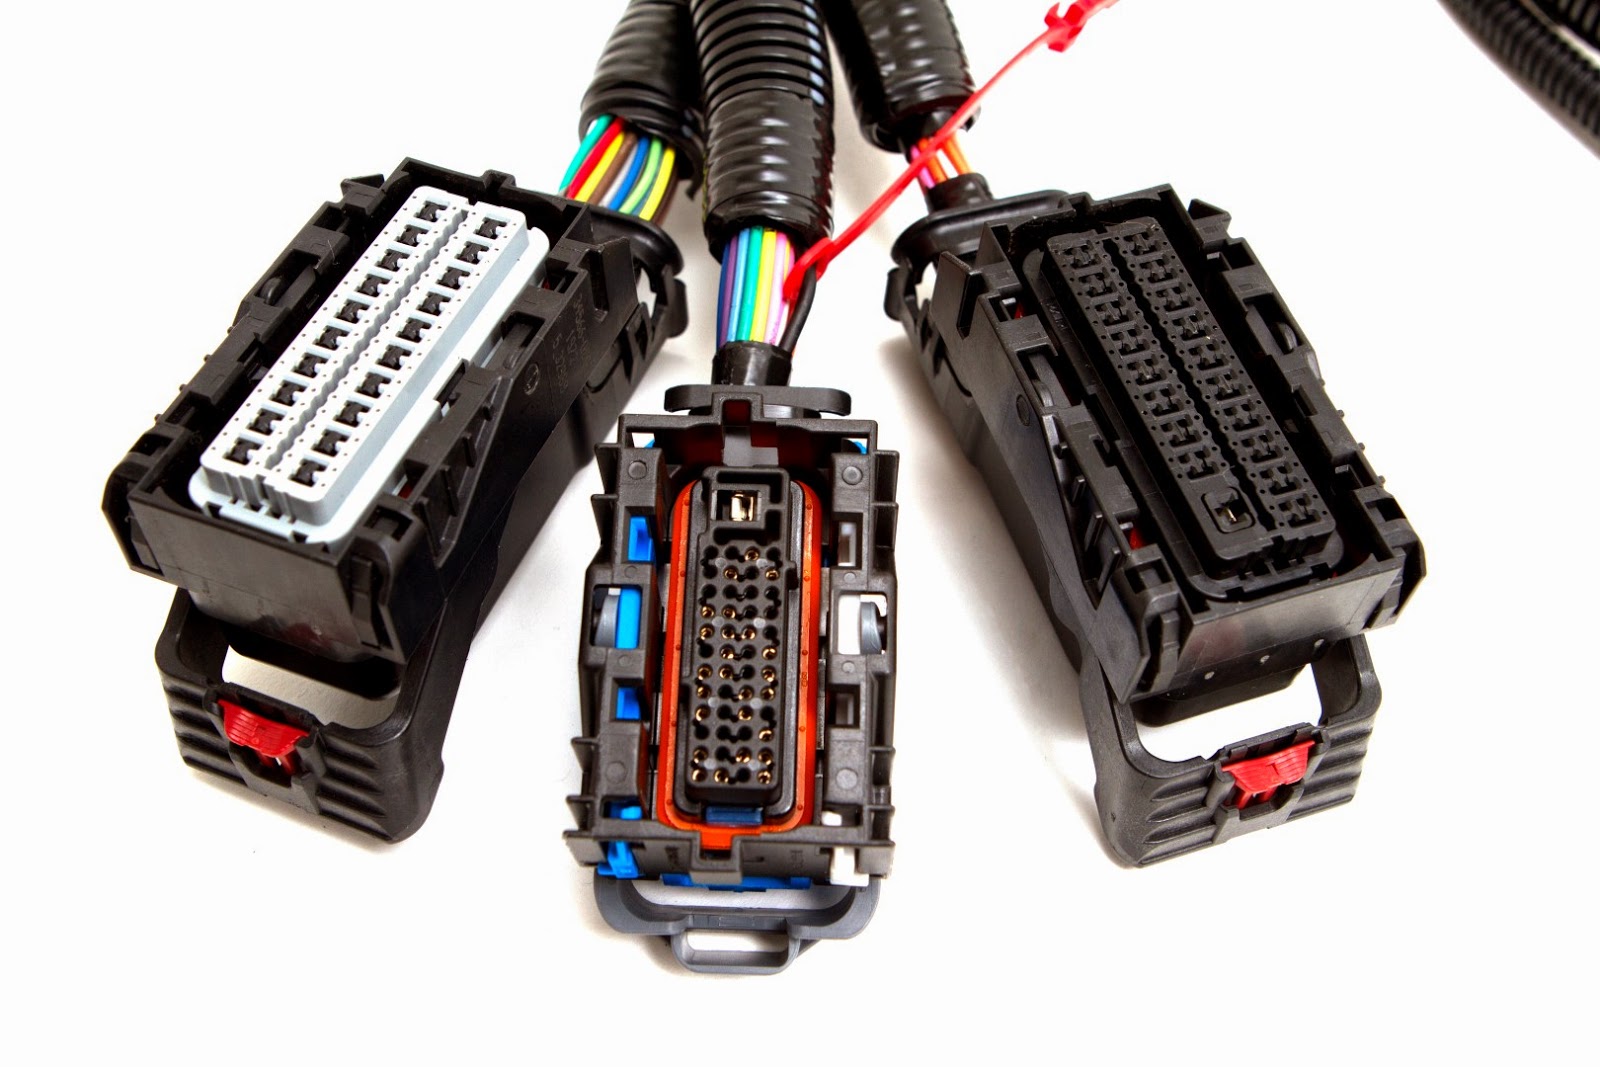 Wiring Harnesses: Manuals, Instructional & Basic Information